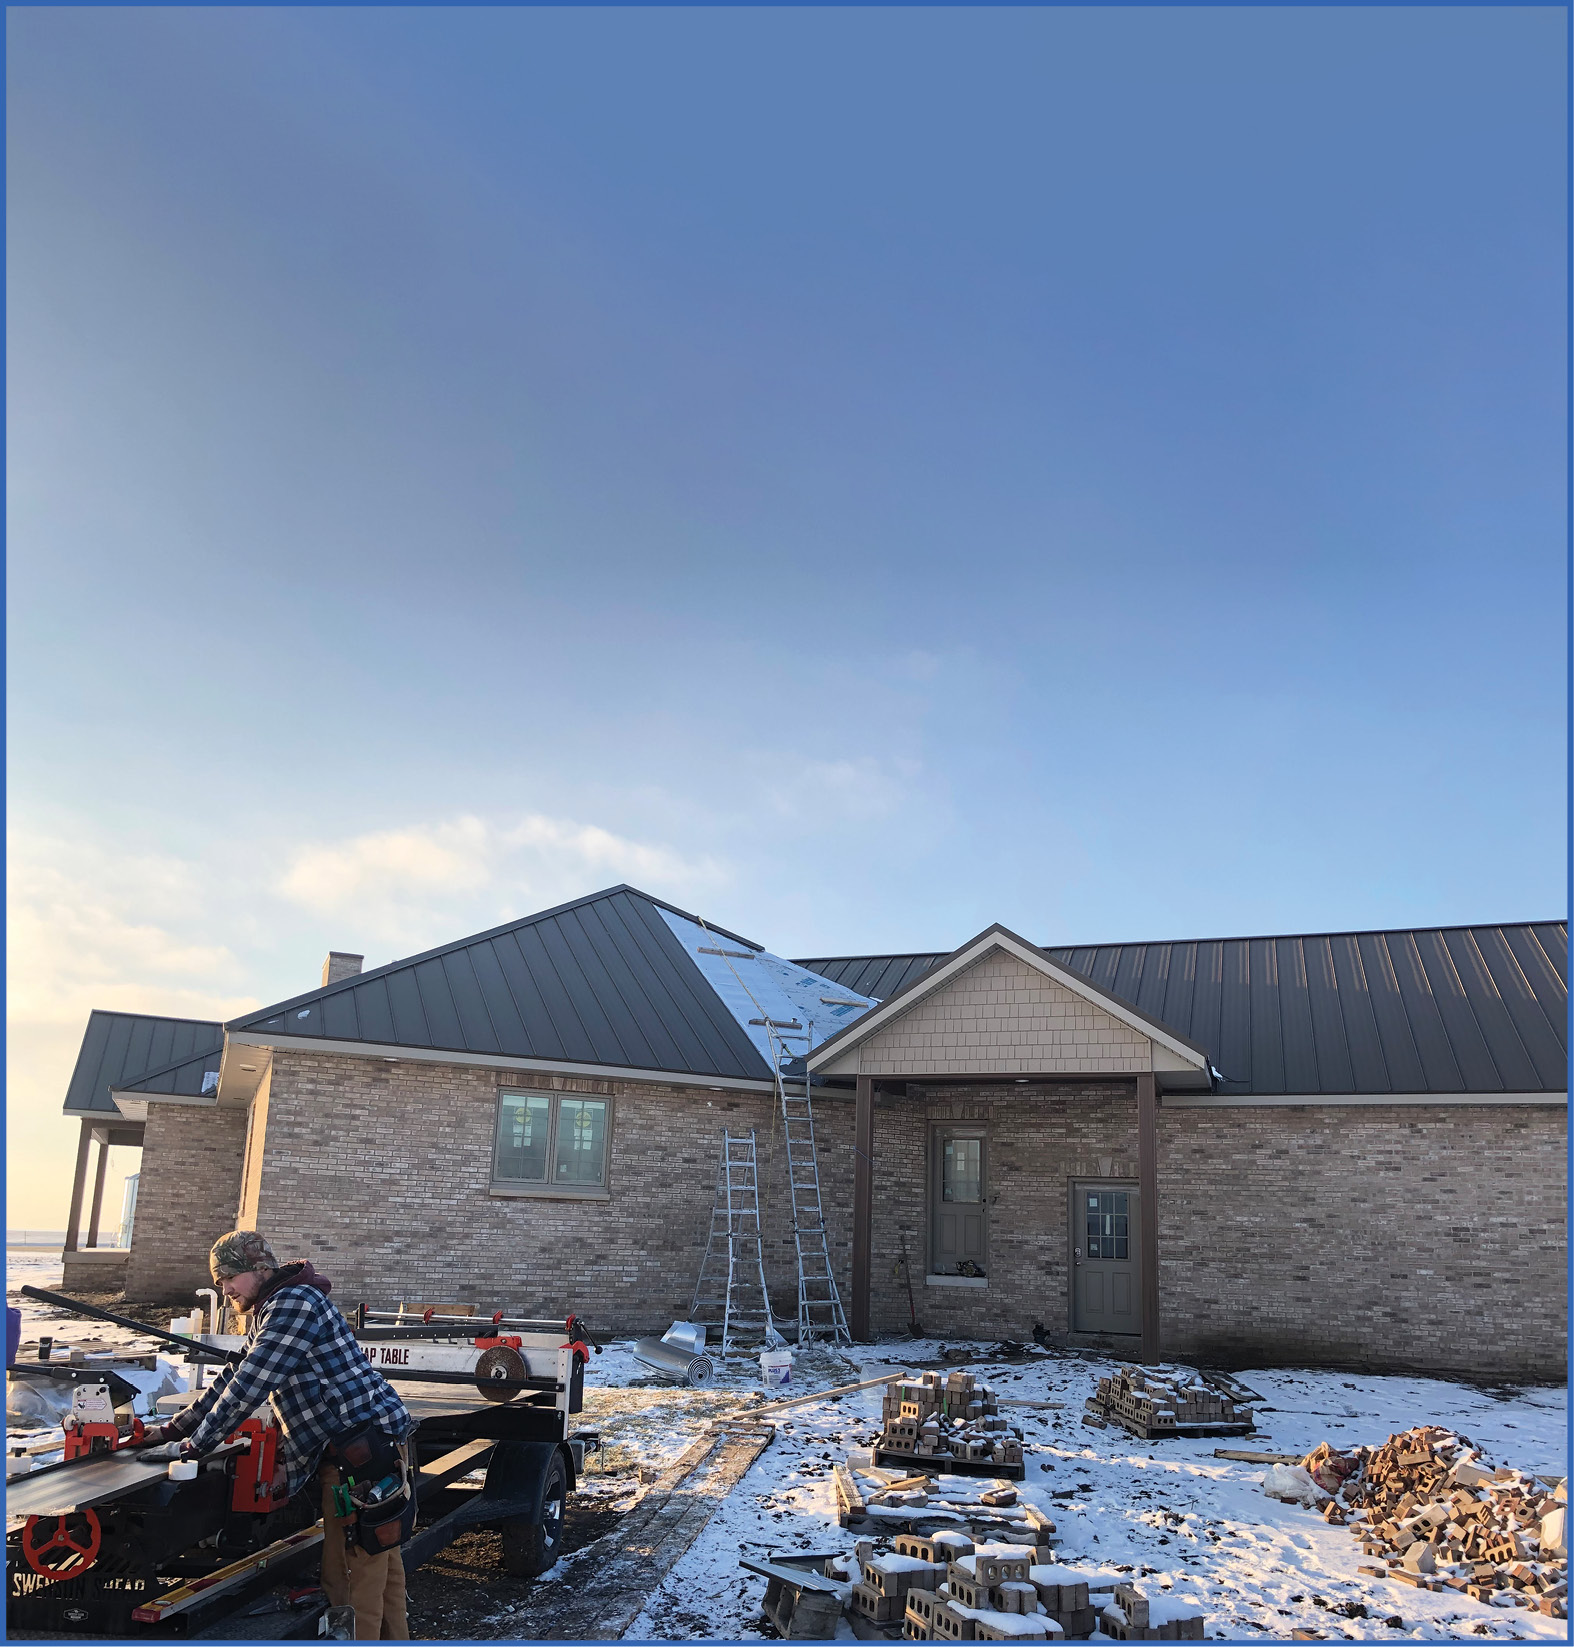 WINTER ROOFING–When an Install Can’t Wait